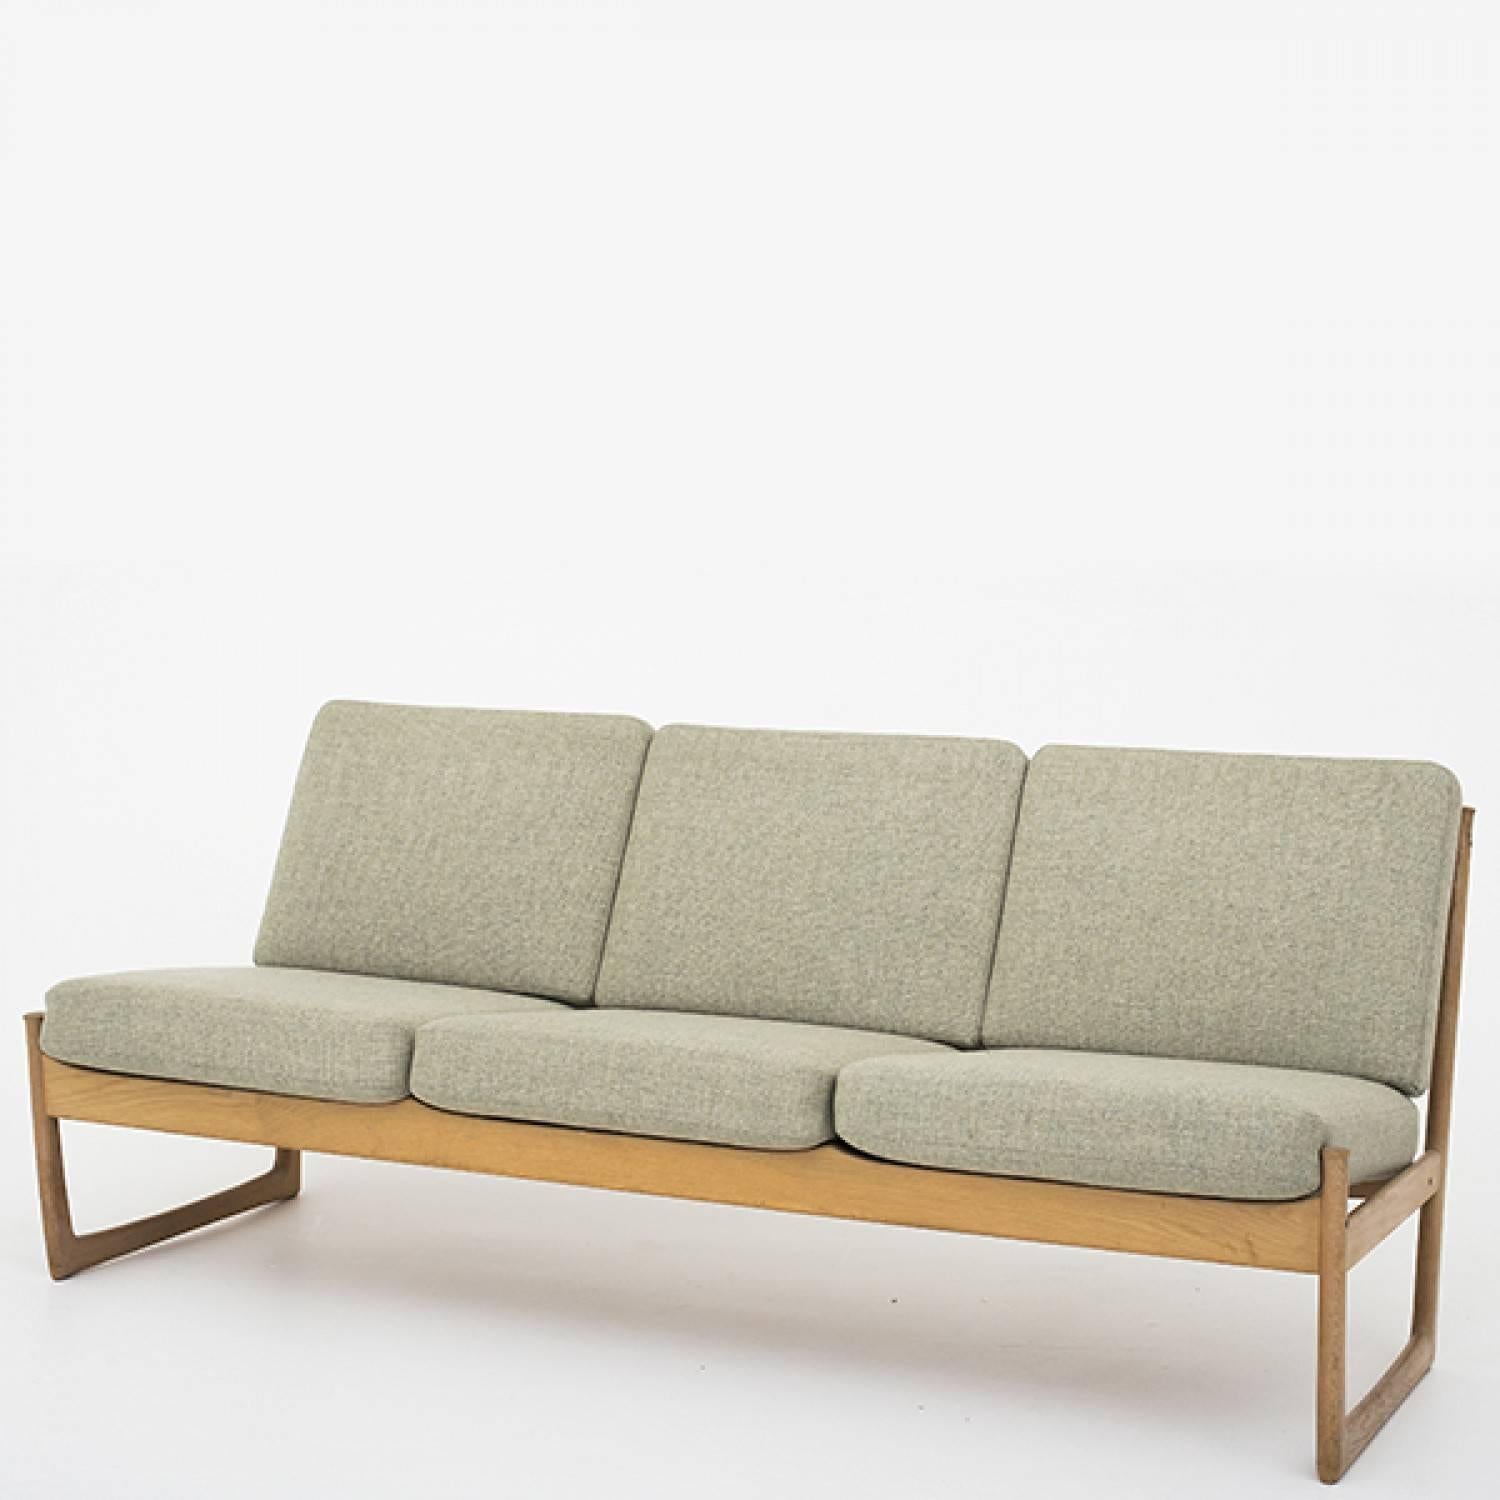 Sofa in oak and cushions in wool. Designed by Peter Hvidt & Orla Mølgaard Nielsen. Maker, France and Son.